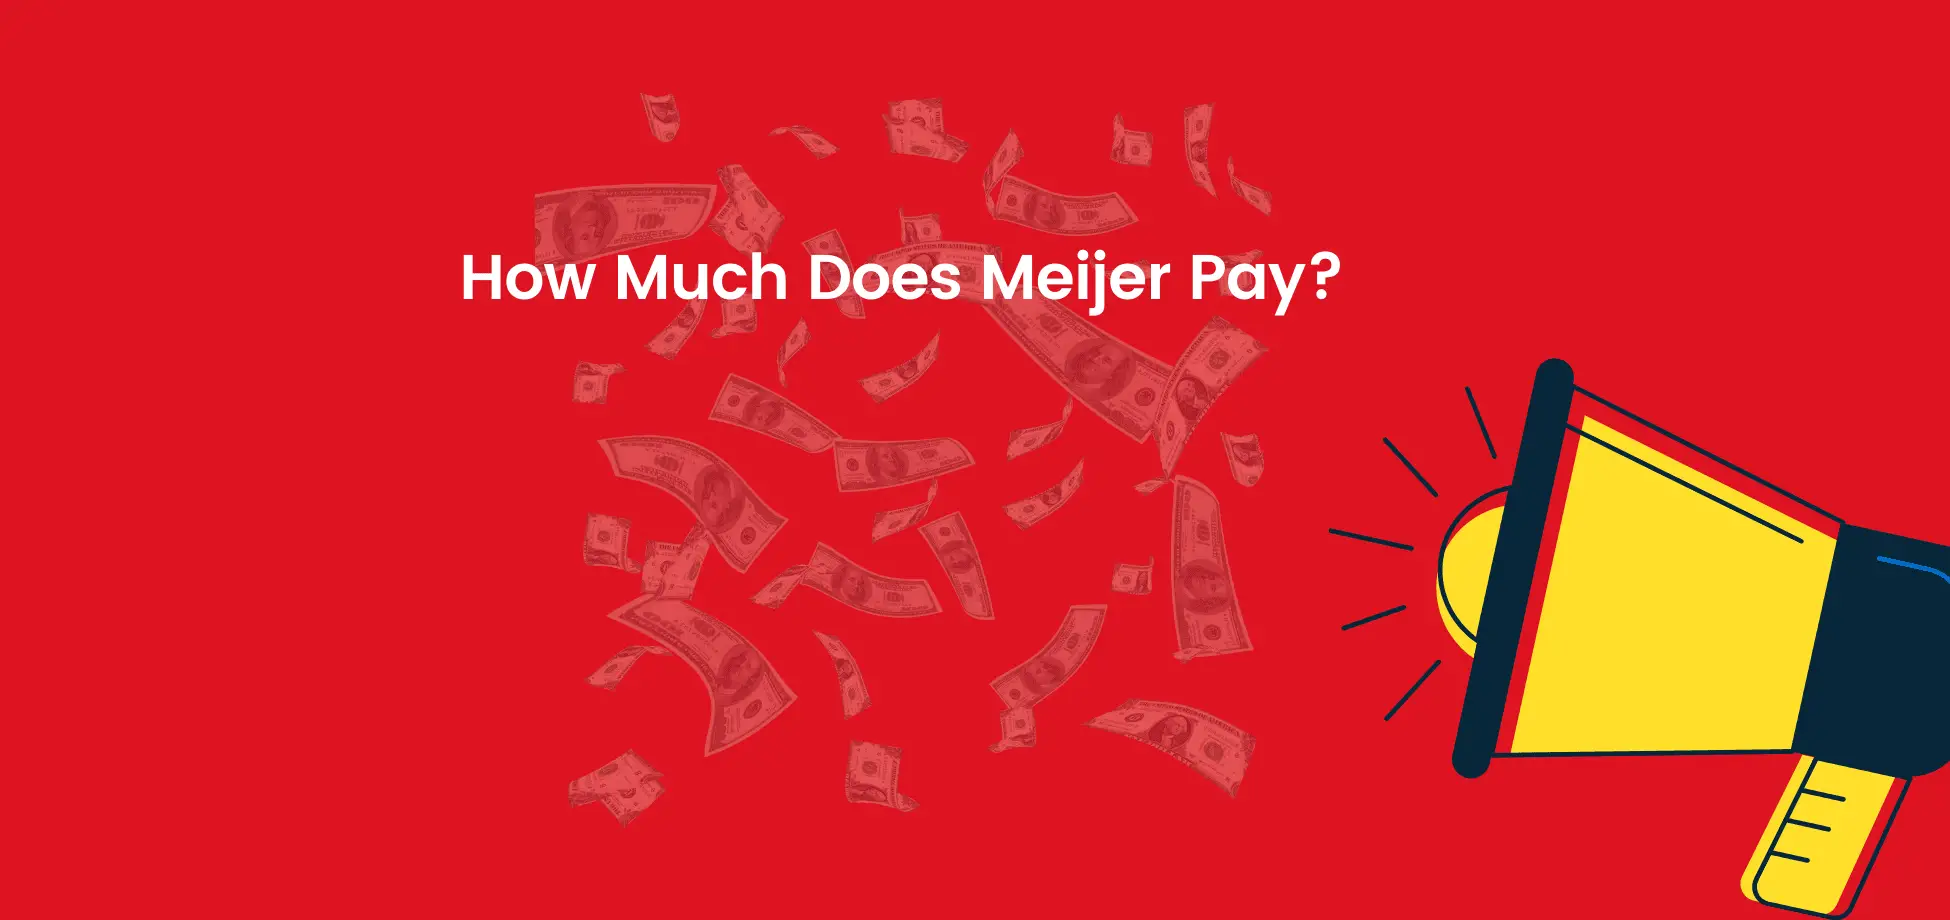 The Meijer starting pay is fairly average for these types of retail chains.